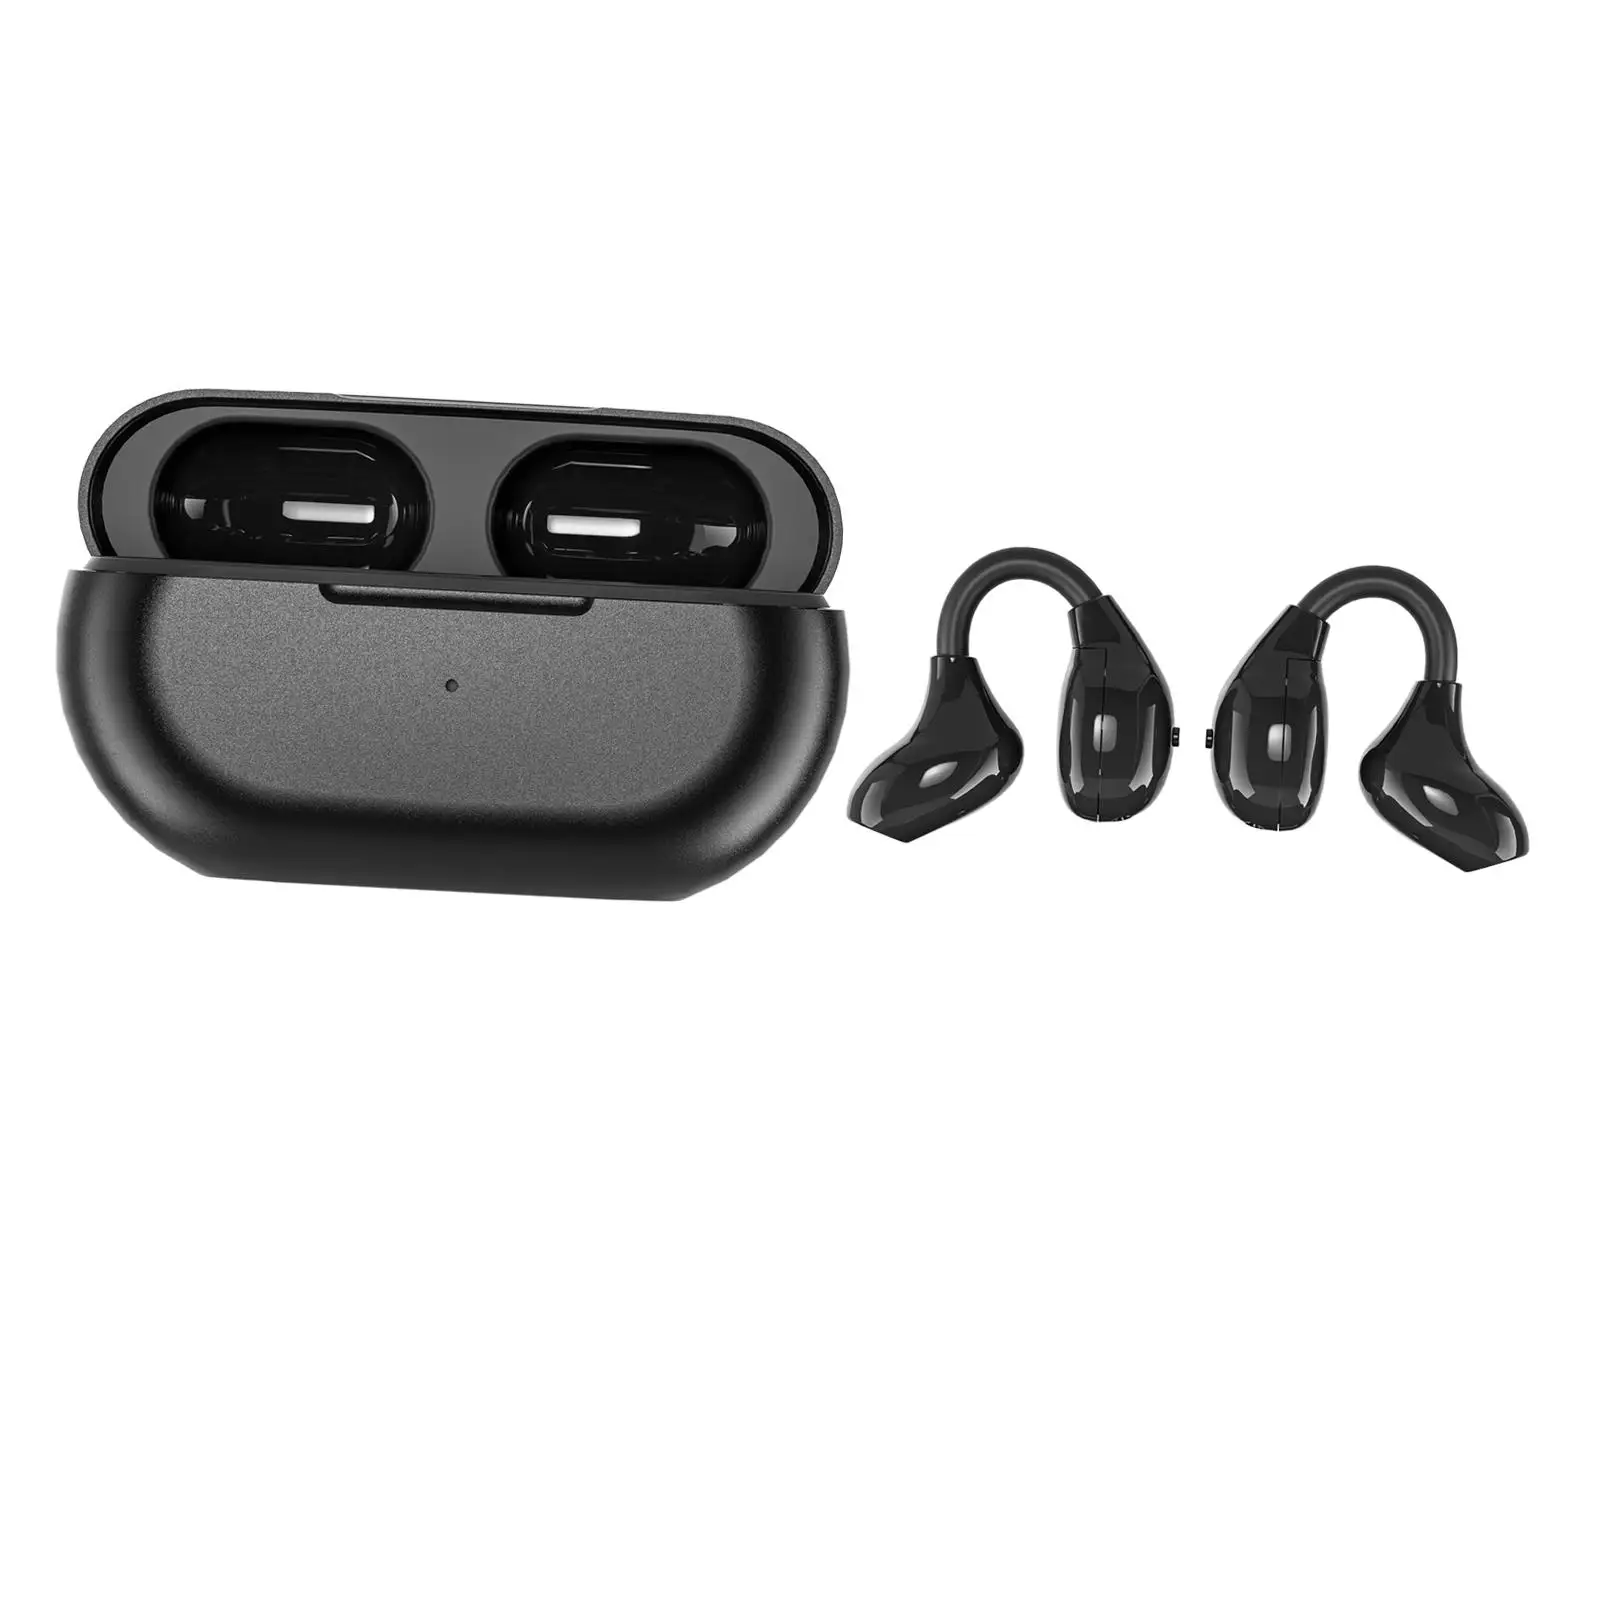 Ear Clip Wireless Headset V5.3 Calling HiFi sound sports Earbuds Earphones Earpiece for fitness business Driving Sports Workout